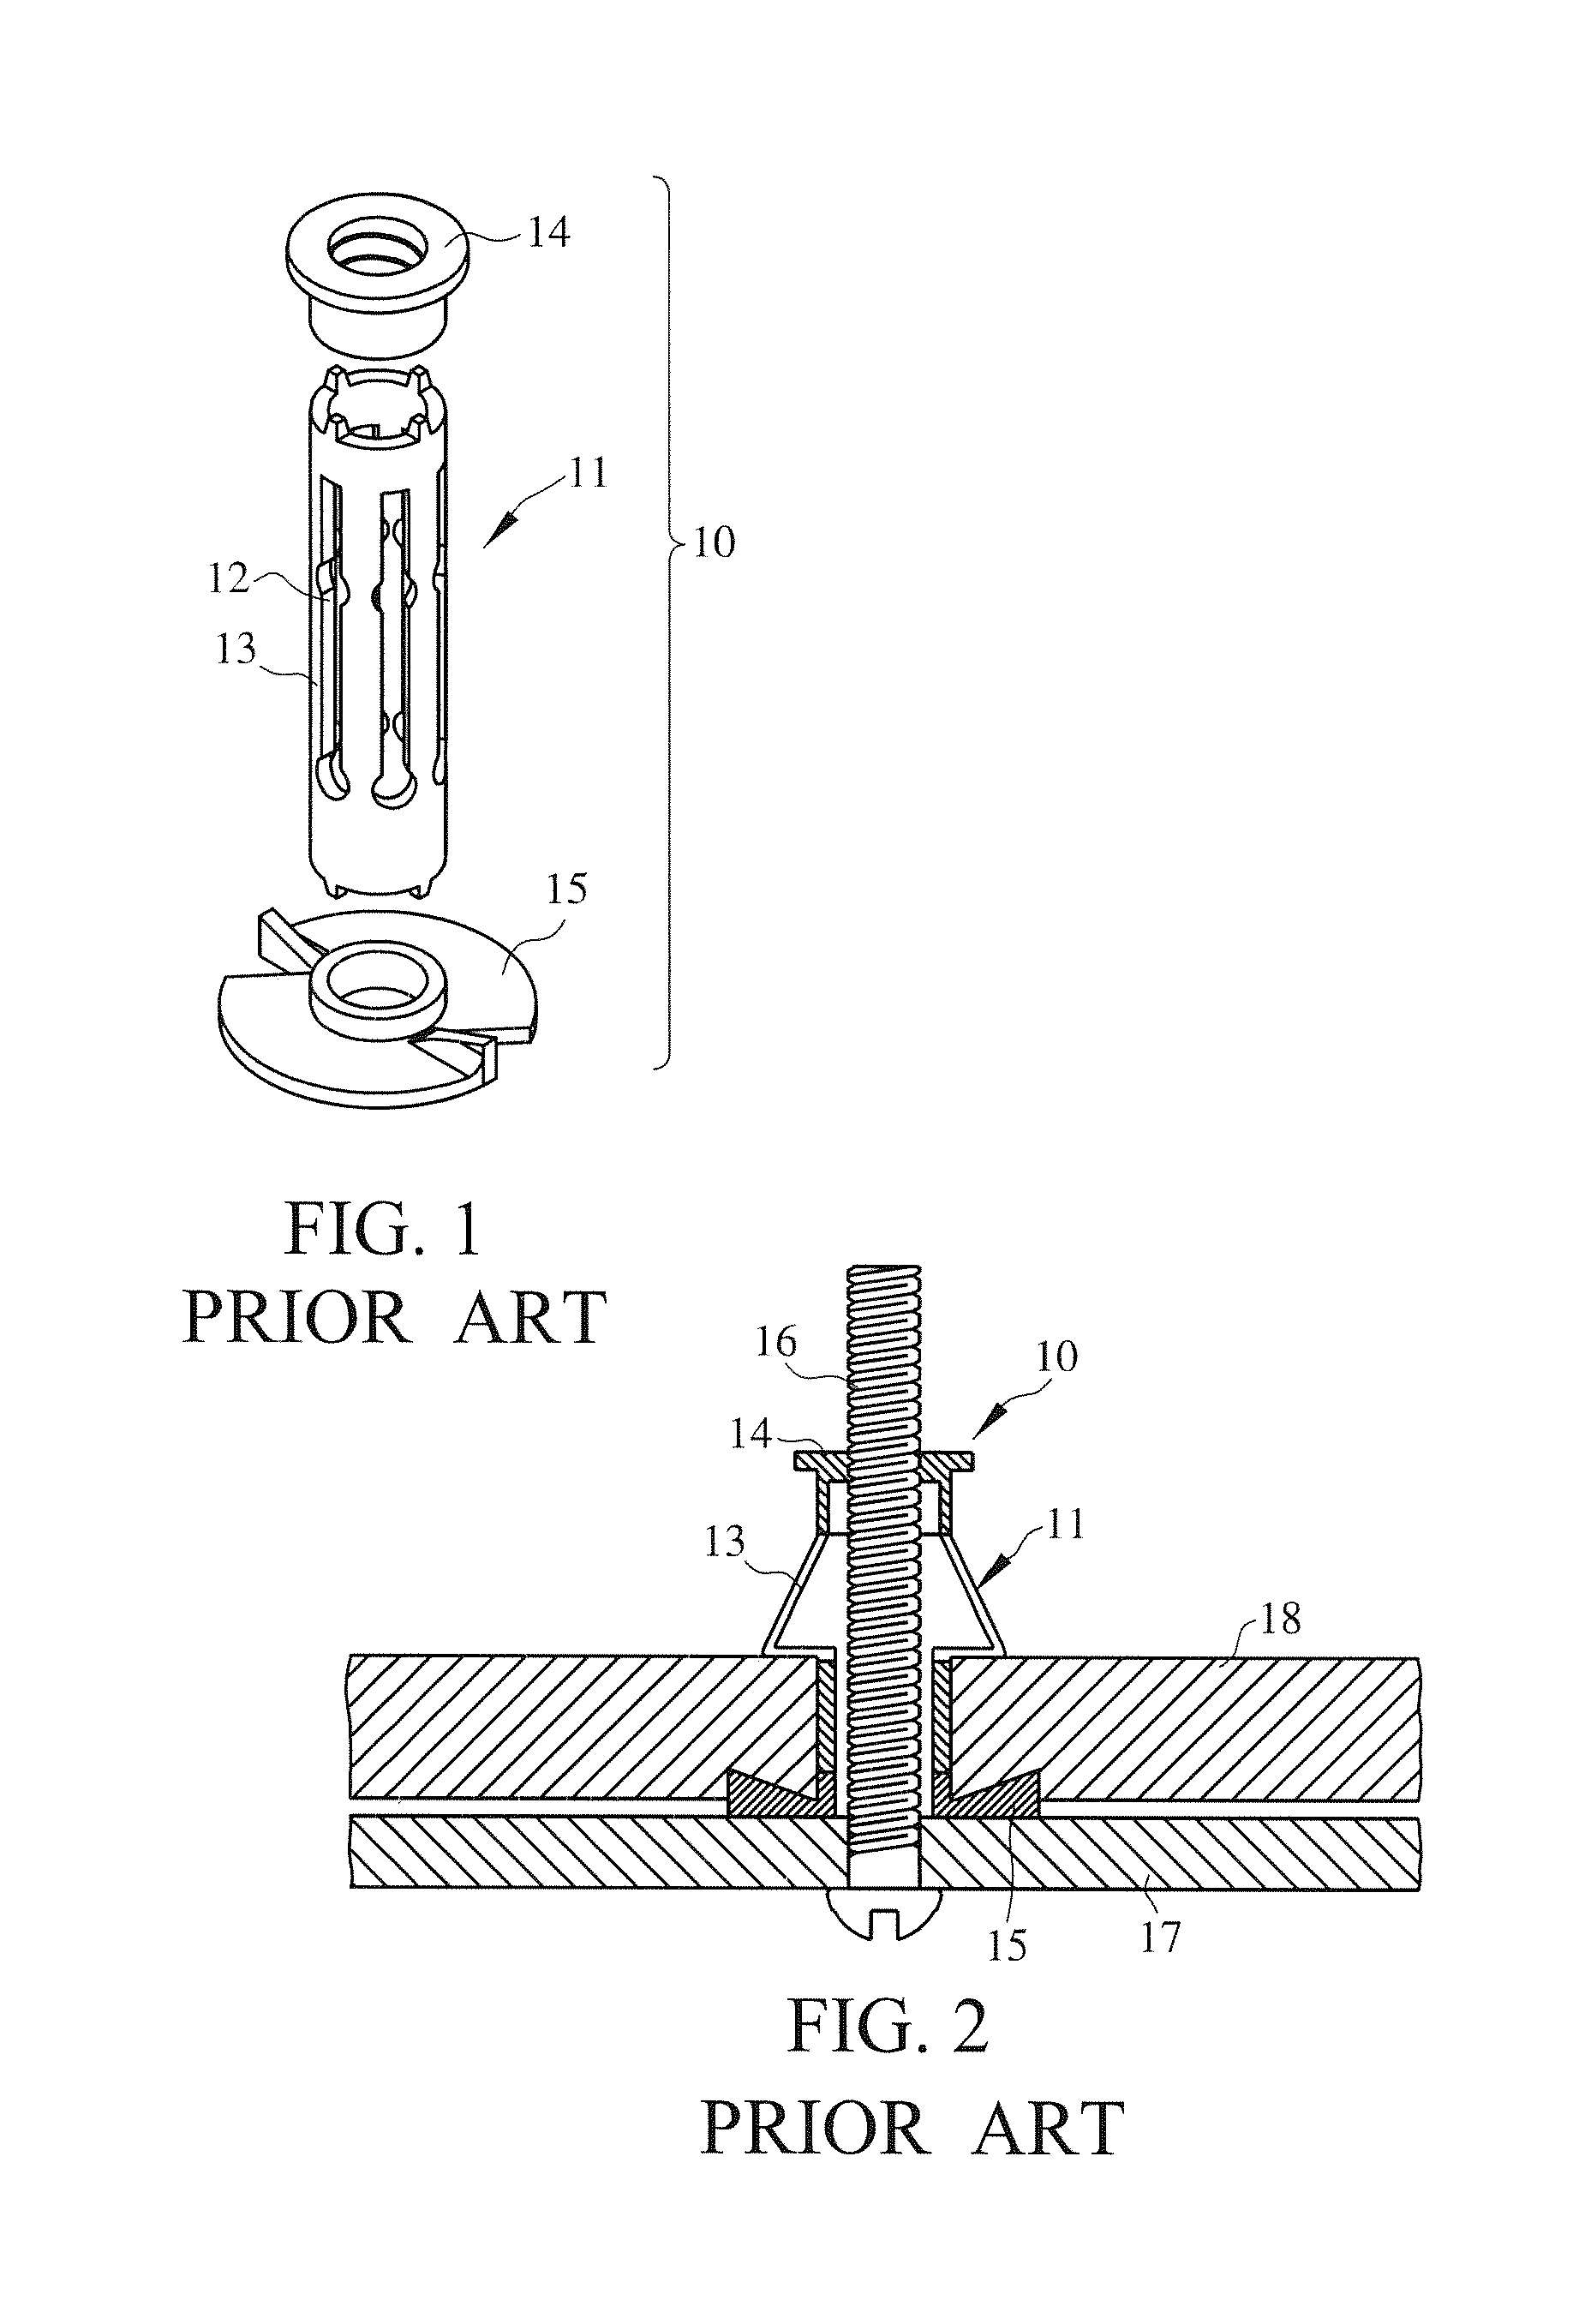 Self-drilling expansion fastener and method of forming same